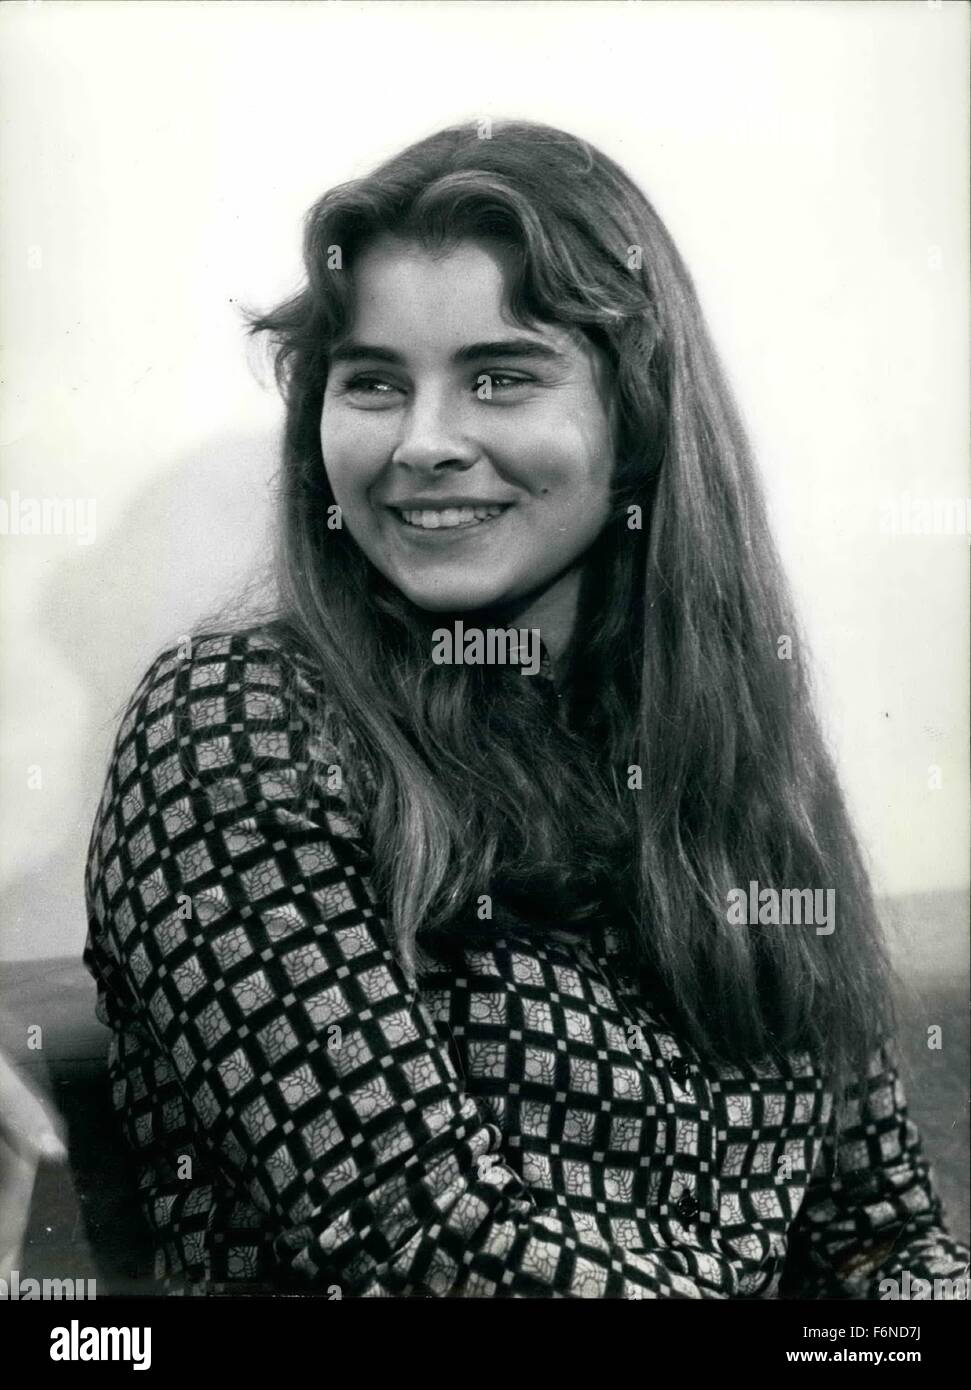 1961 - Taryn Power, second daughter of the late actor Tyrone Power and Linda Christian, has now 21 year and has celebrated the anniversary signing a favorable contract with the Argentina producer Rafael Cohen for a musical film 'Siempre triunfa el amor' (Love always triumphs)'. Her sister omina is married to an Italian singer and has two children. Picture Shows: Taryn Power very happy after the signature. © Keystone Pictures USA/ZUMAPRESS.com/Alamy Live News Stock Photo